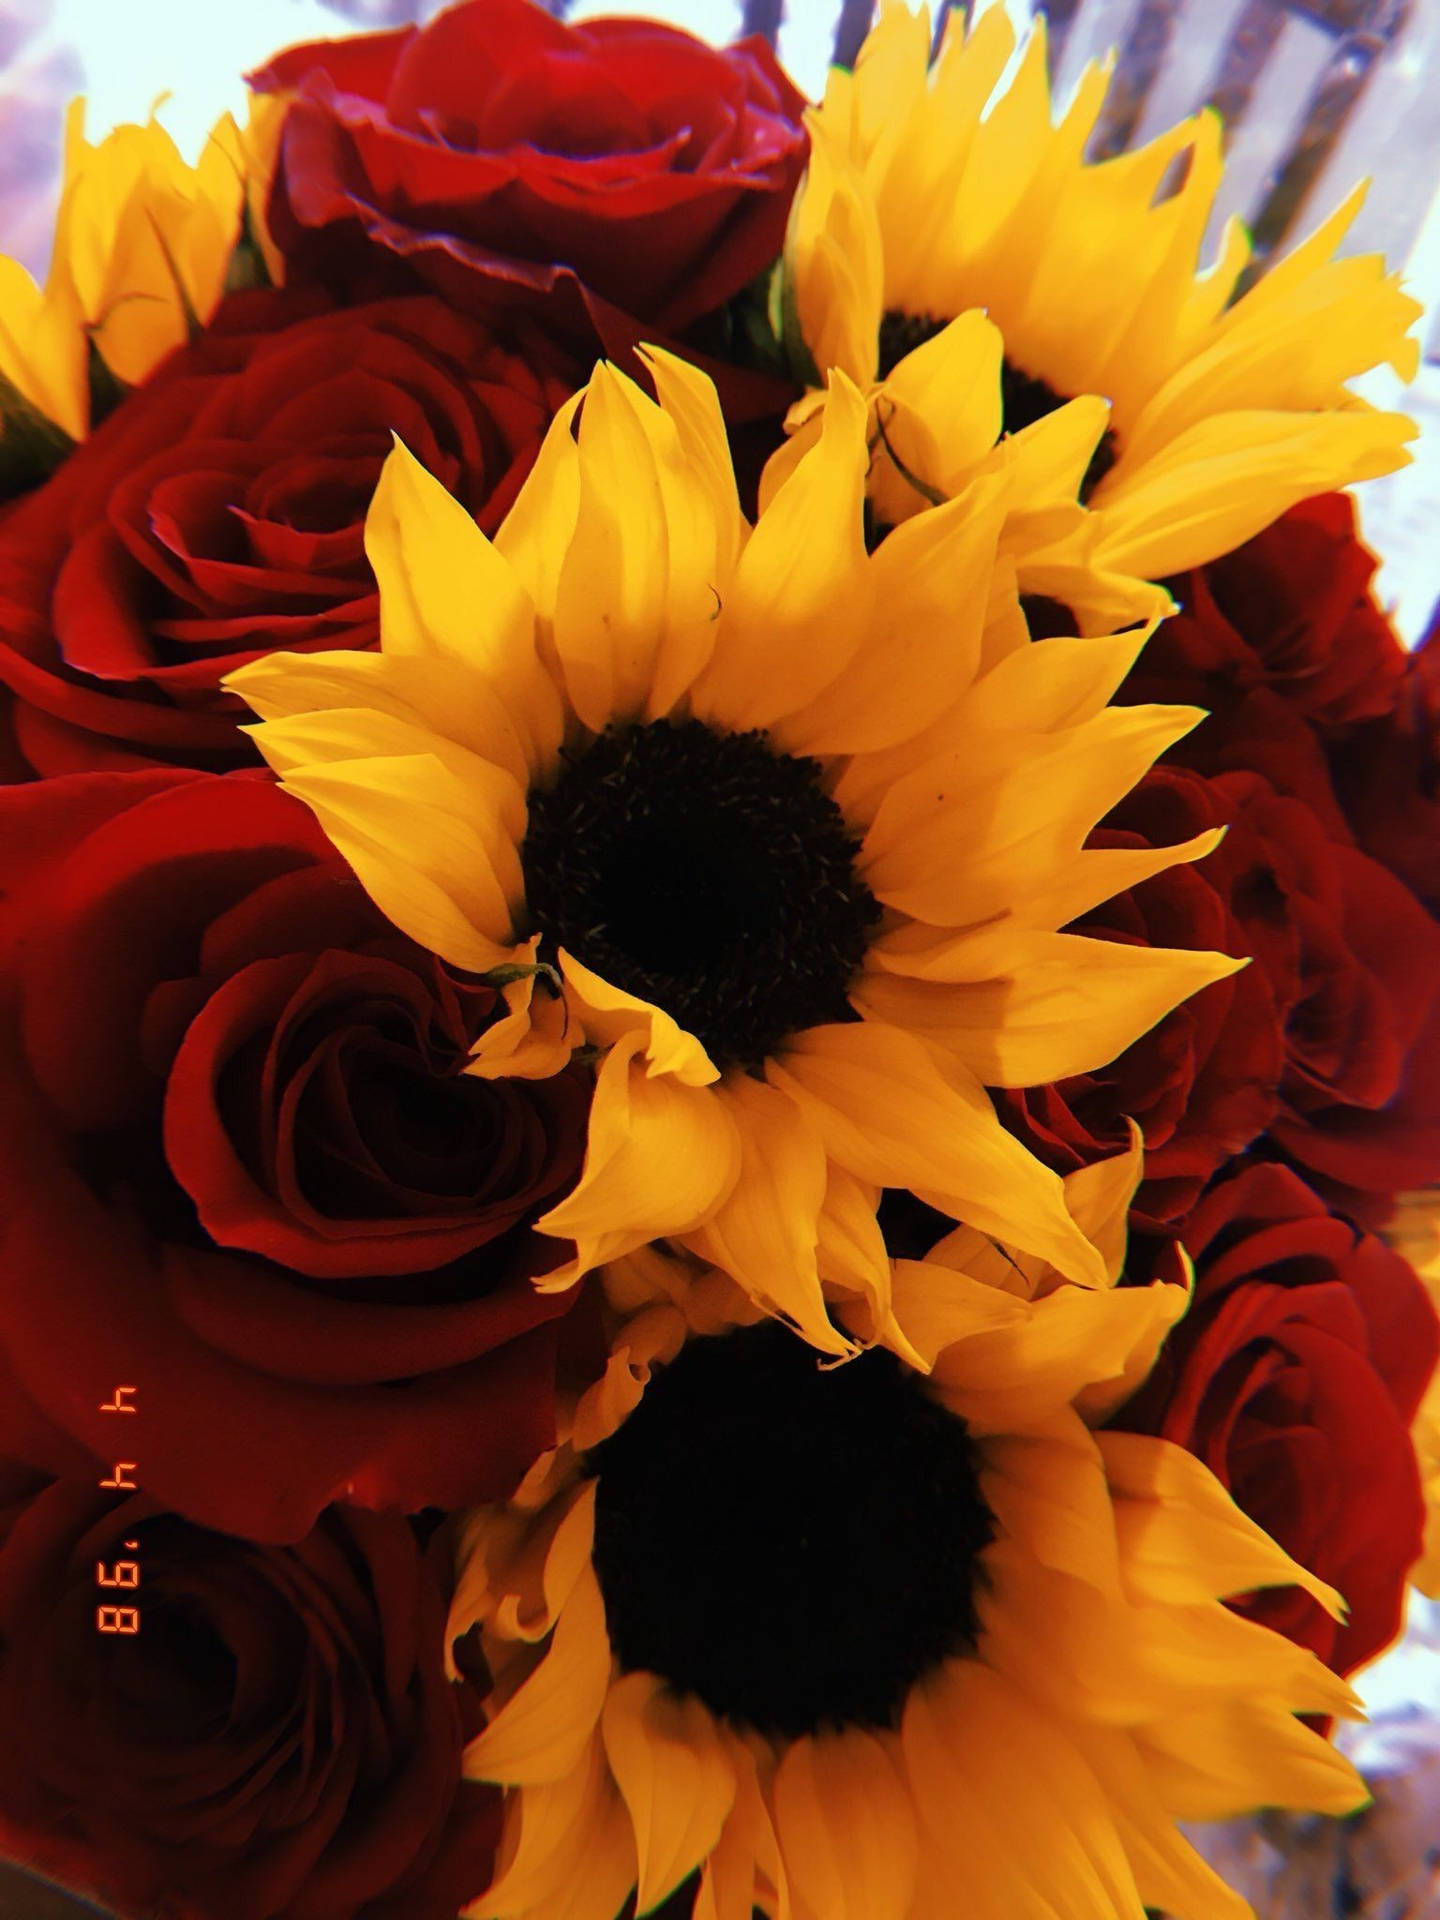 Sunflowers And Roses Gift Bouquet Wallpaper